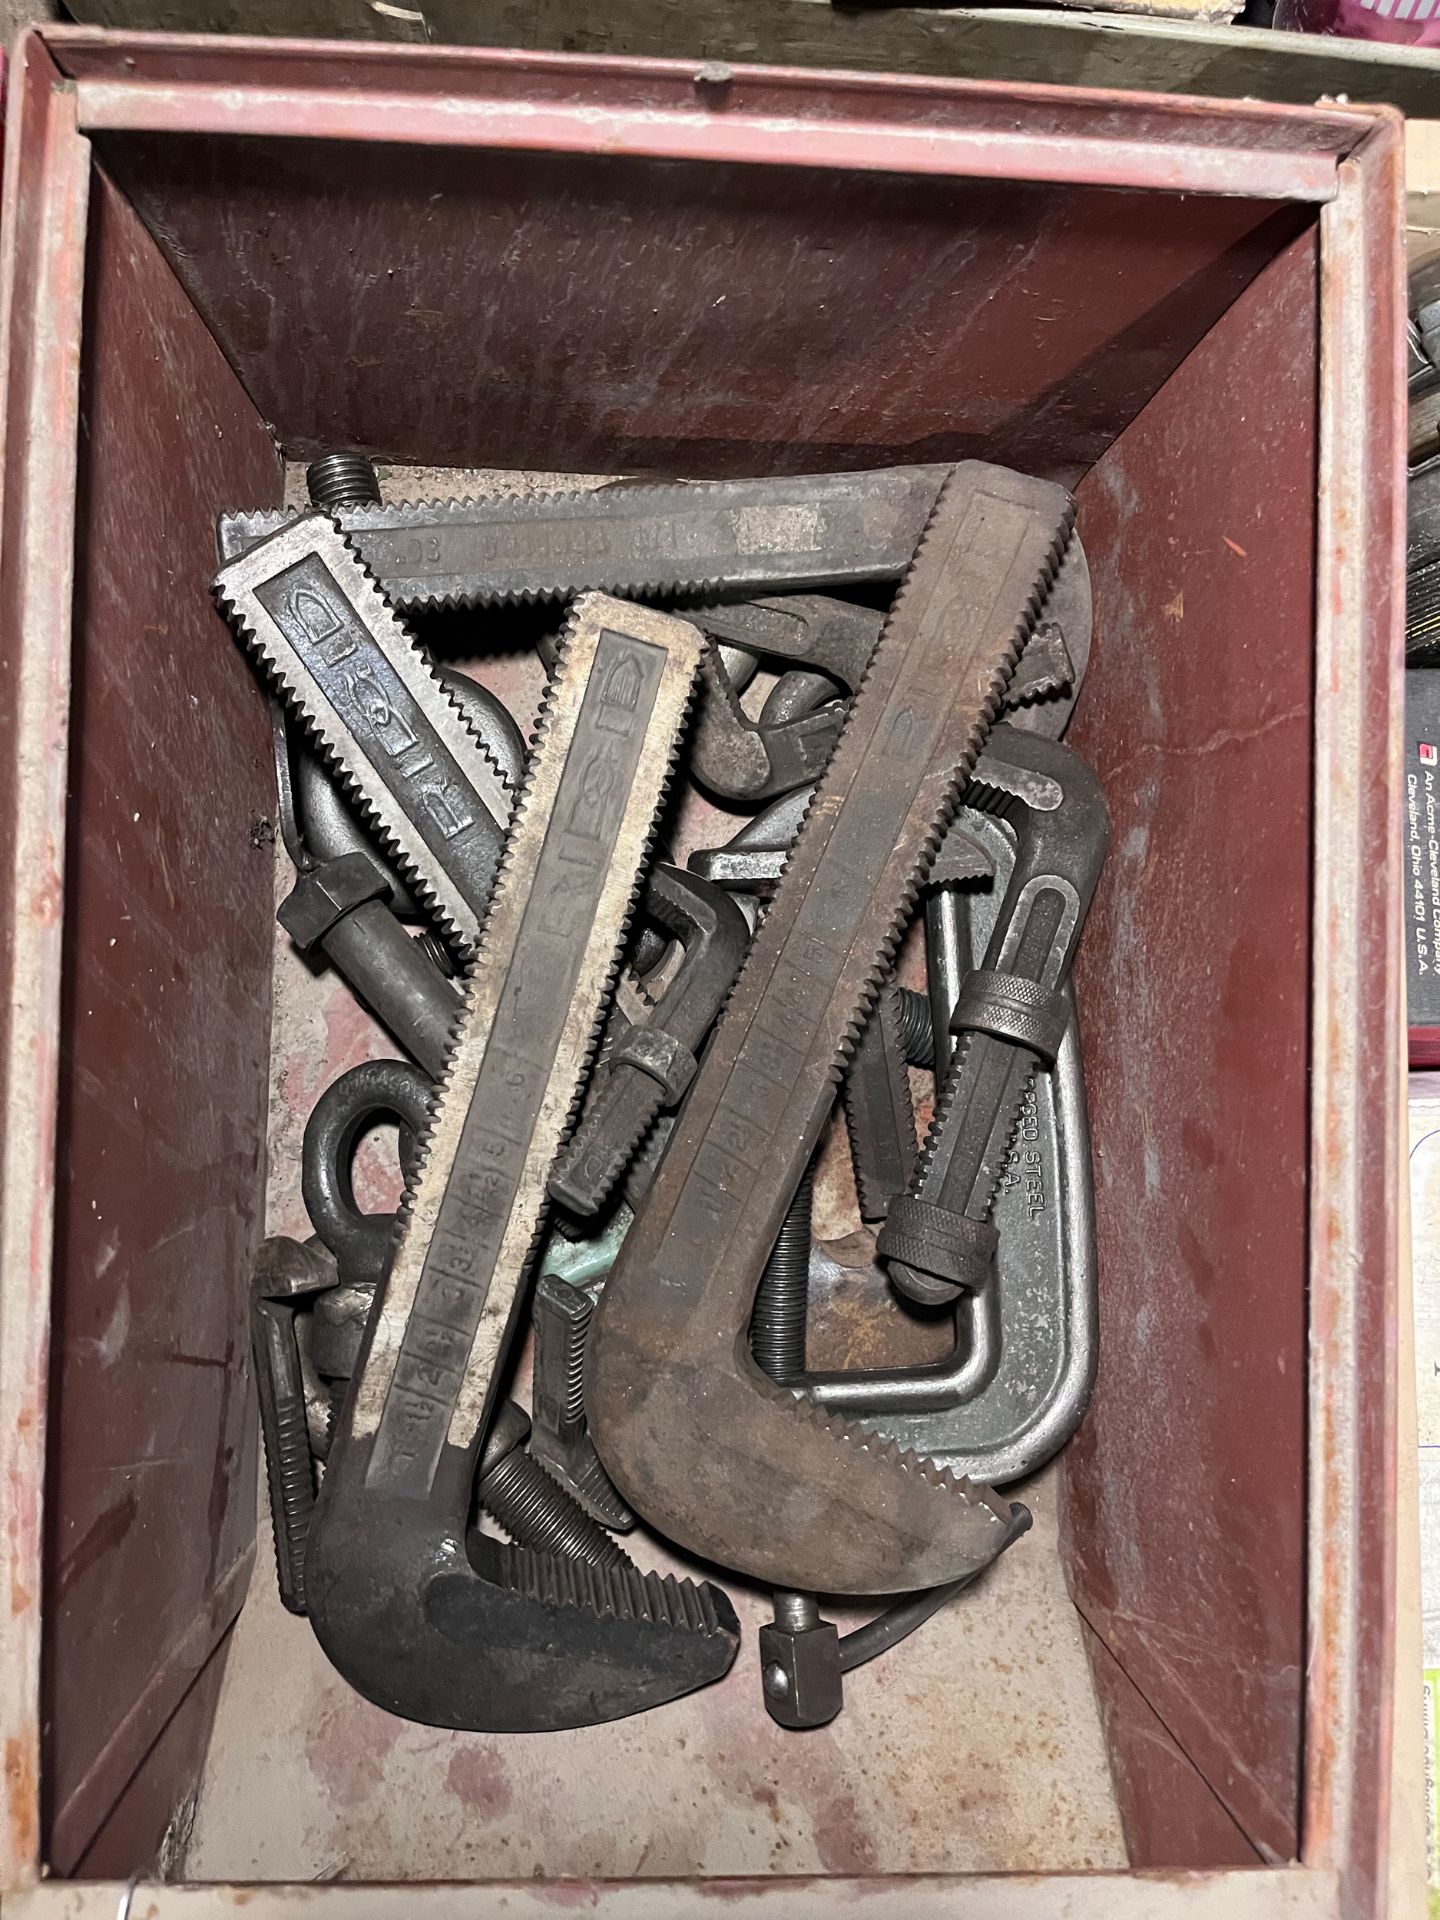 Lot of C-Clamps, I-Bolts, & Ridgid Hook Jaws - Image 2 of 2